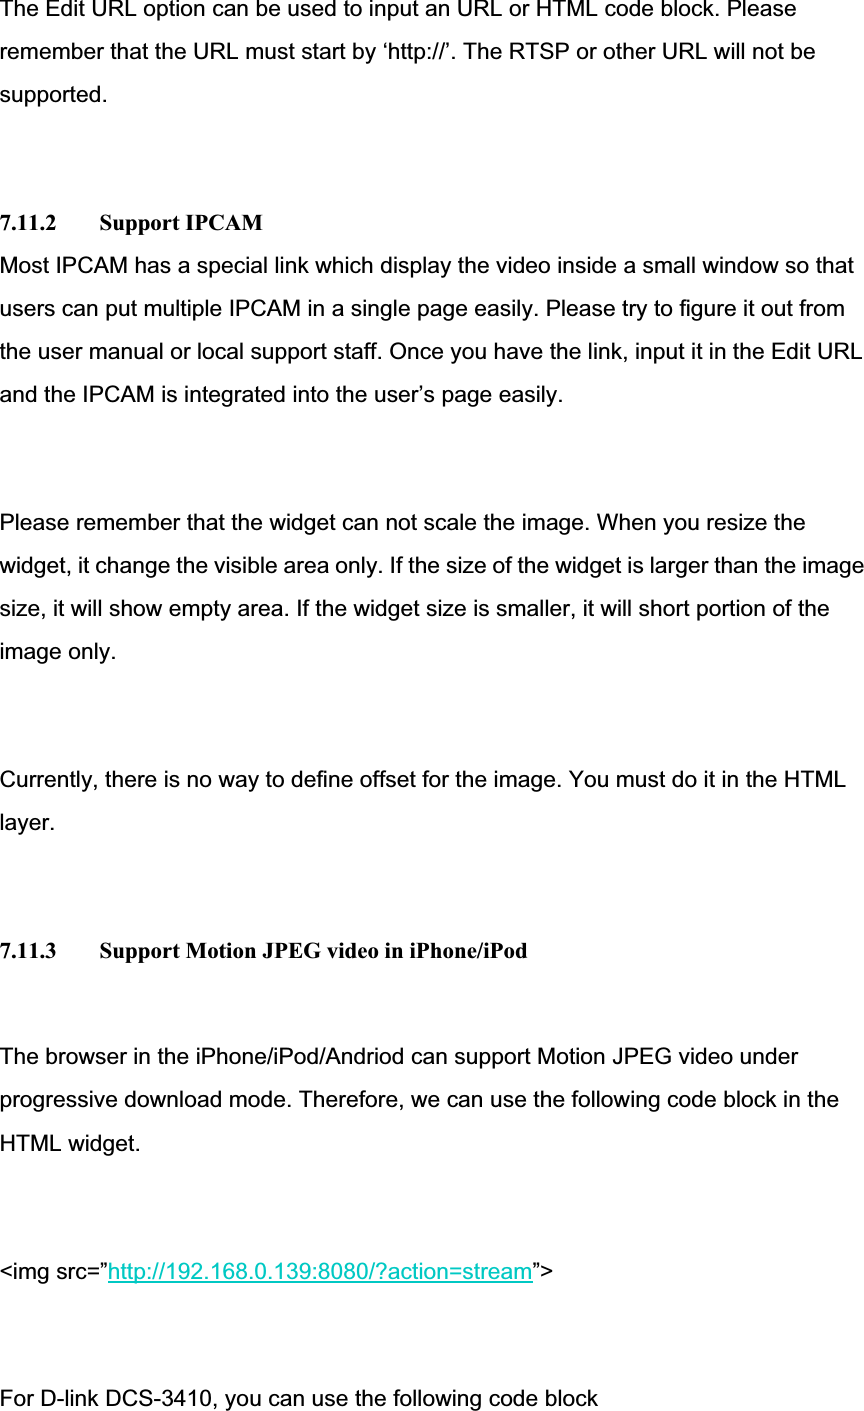 The Edit URL option can be used to input an URL or HTML code block. Please remember that the URL must start by ‘http://’. The RTSP or other URL will not be supported.7.11.2 Support IPCAM Most IPCAM has a special link which display the video inside a small window so that users can put multiple IPCAM in a single page easily. Please try to figure it out from the user manual or local support staff. Once you have the link, input it in the Edit URL and the IPCAM is integrated into the user’s page easily. Please remember that the widget can not scale the image. When you resize the widget, it change the visible area only. If the size of the widget is larger than the image size, it will show empty area. If the widget size is smaller, it will short portion of the image only. Currently, there is no way to define offset for the image. You must do it in the HTML layer.7.11.3  Support Motion JPEG video in iPhone/iPod The browser in the iPhone/iPod/Andriod can support Motion JPEG video under progressive download mode. Therefore, we can use the following code block in the HTML widget. &lt;img src=”http://192.168.0.139:8080/?action=stream”&gt;For D-link DCS-3410, you can use the following code block 